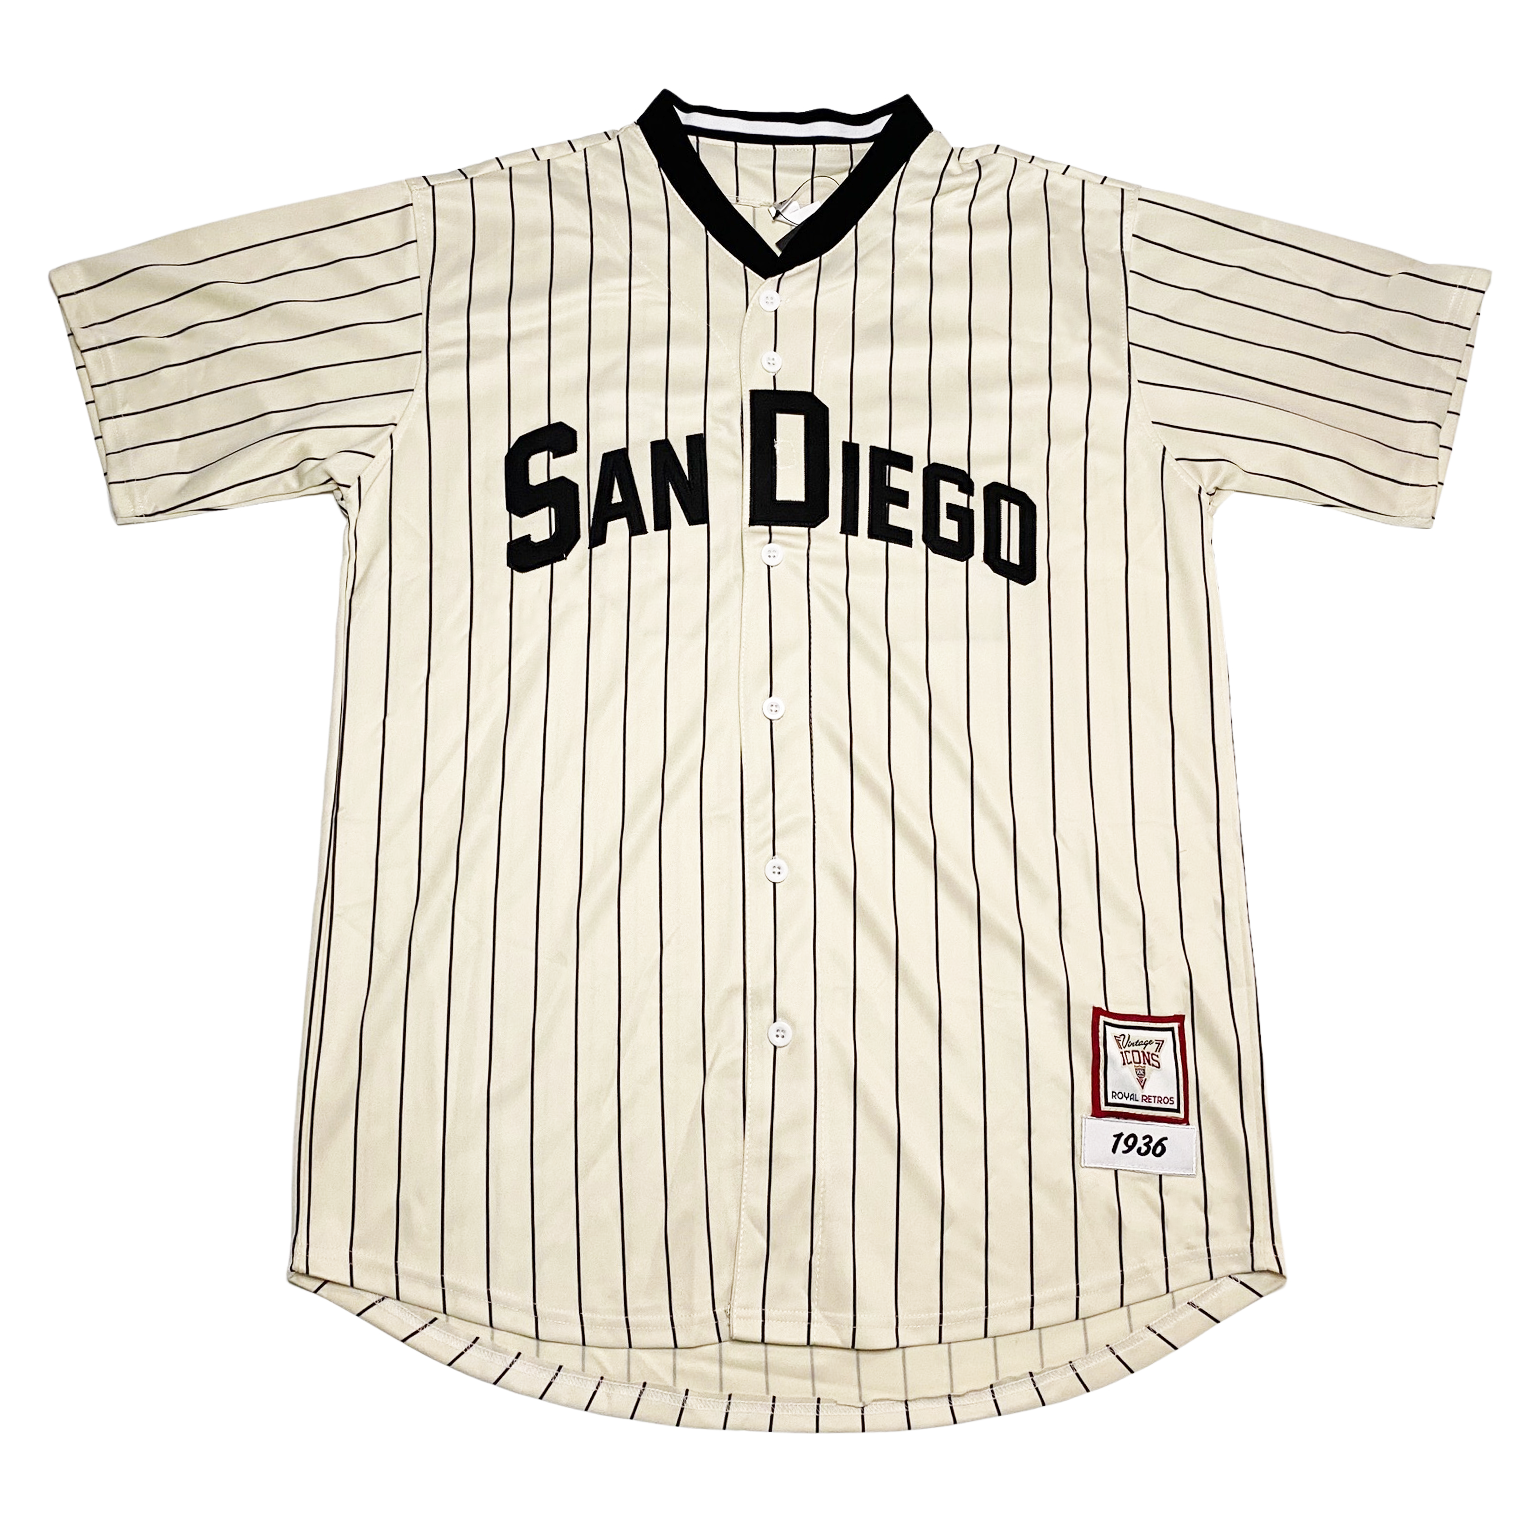 padres striped jersey